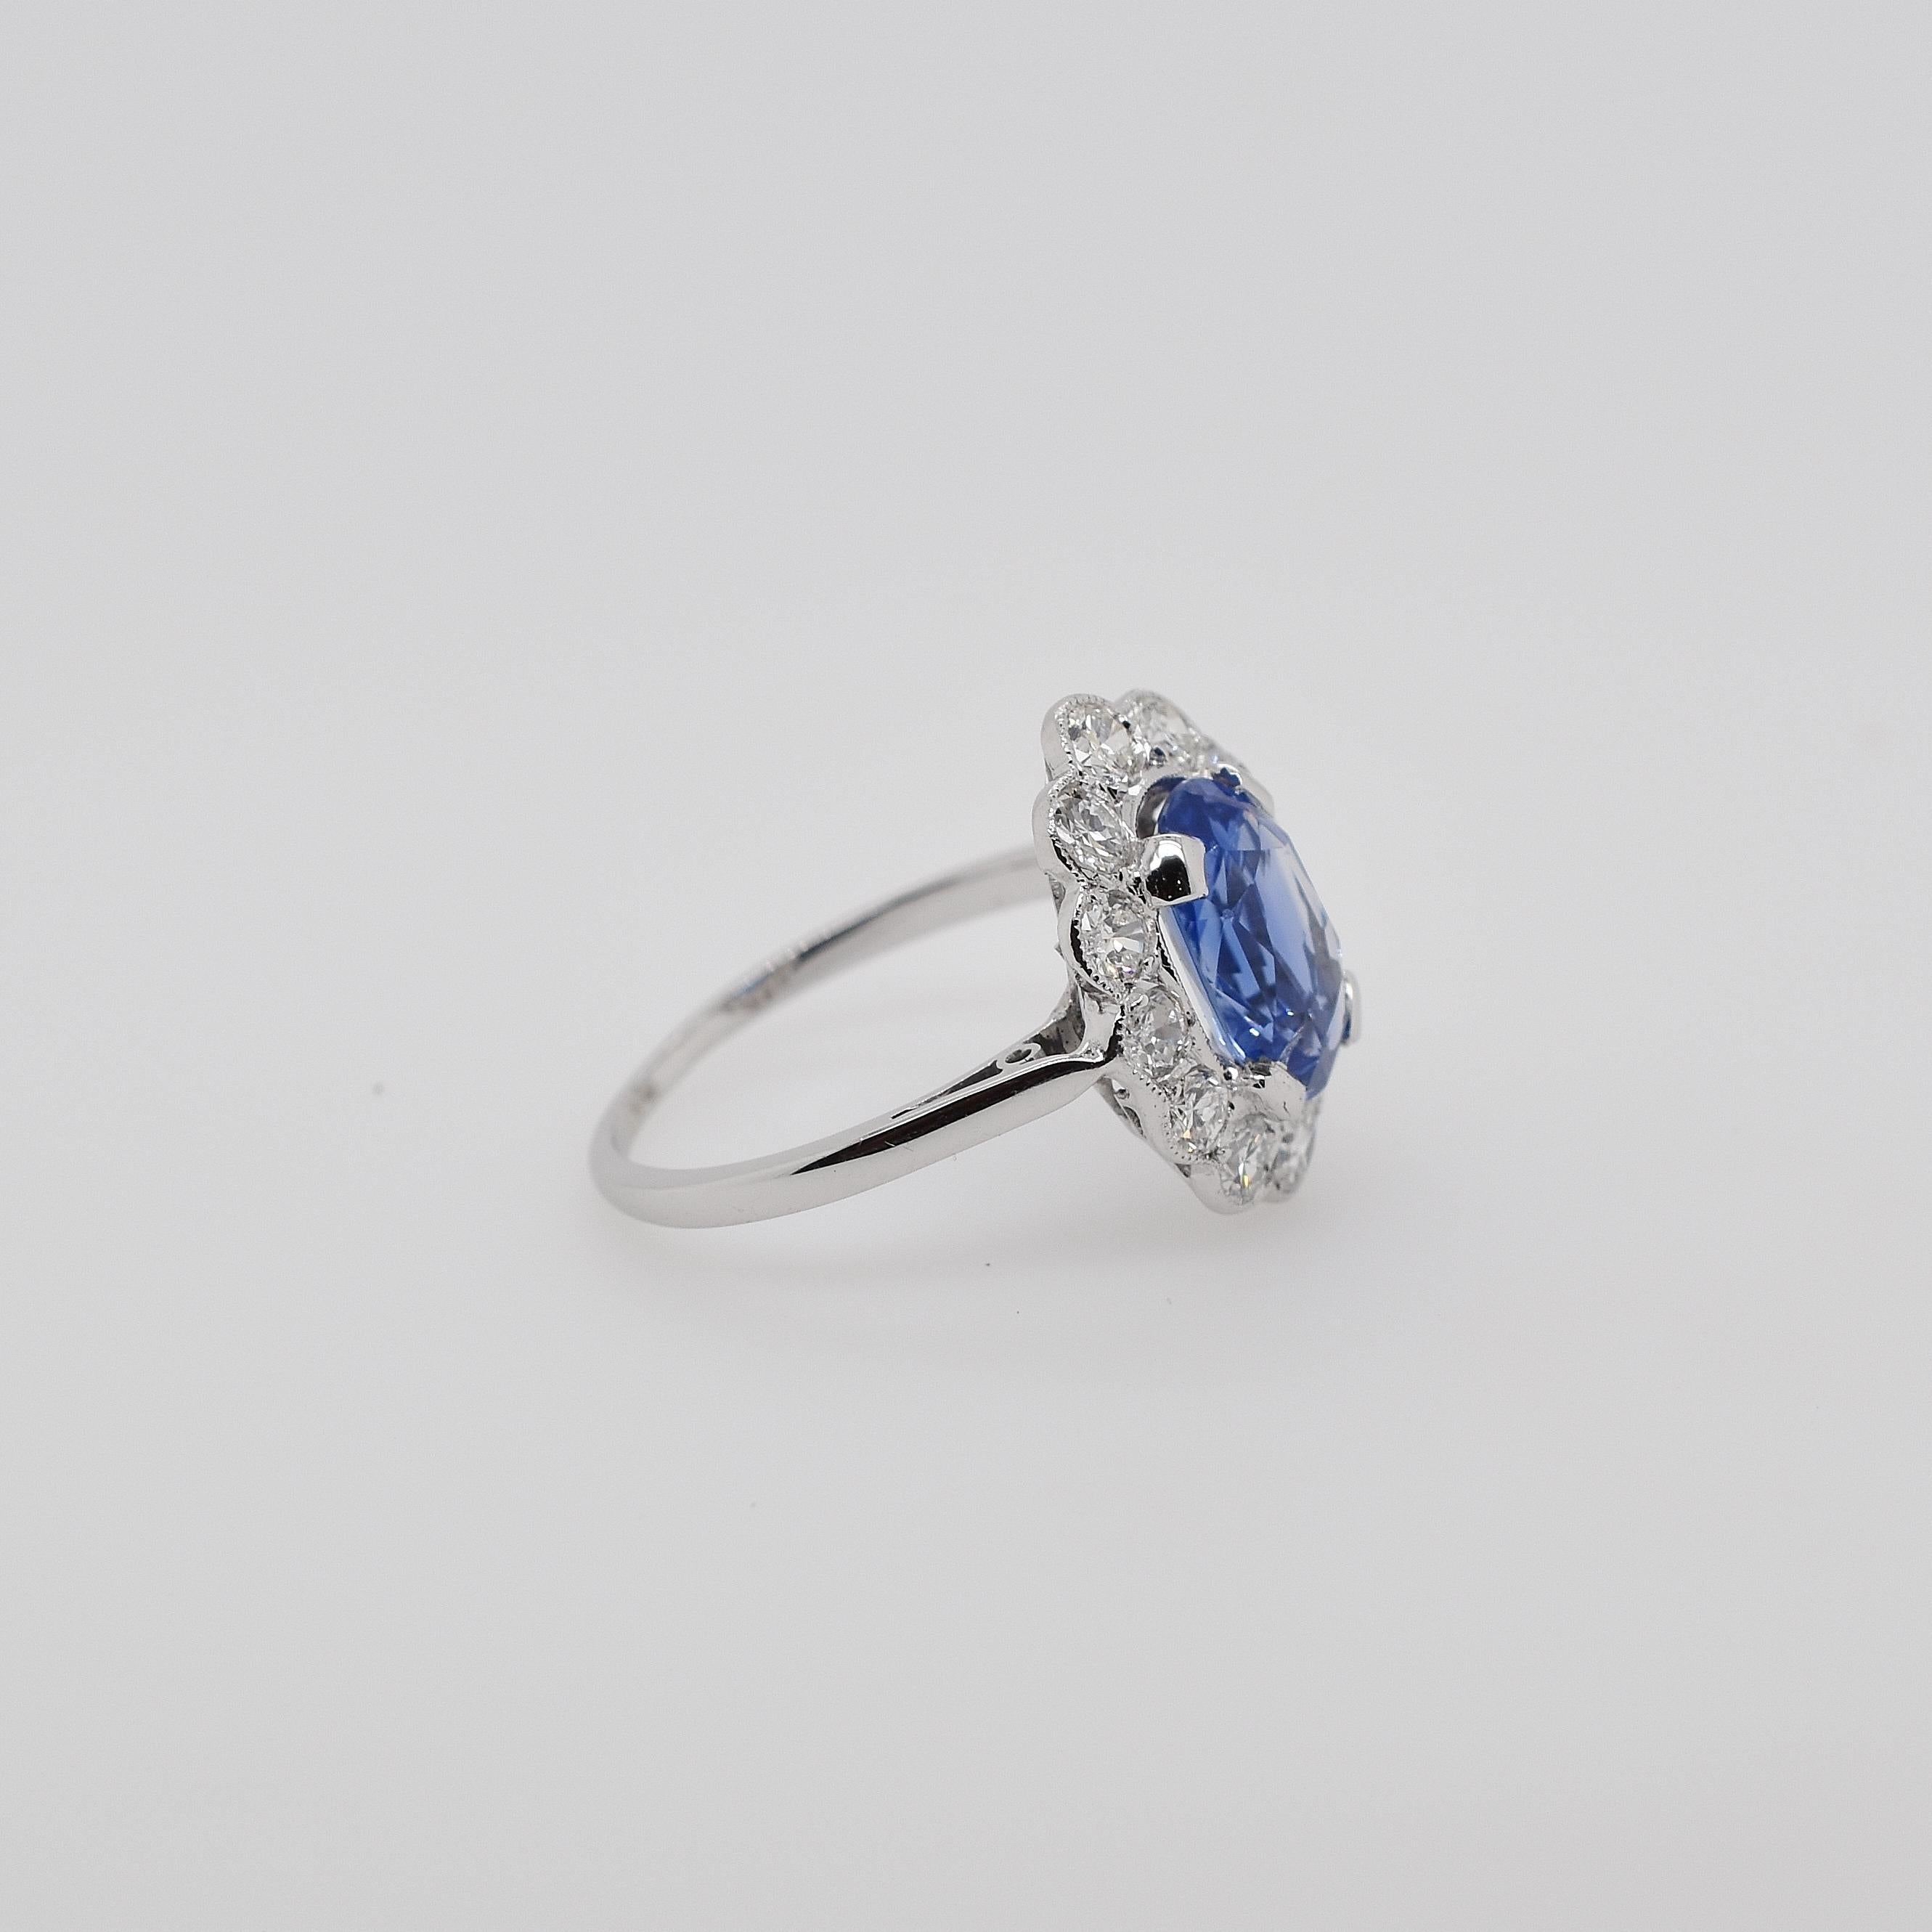 Platinum Ceylon sapphire and semi modern cut diamond scalloped cluster ring. The centre oval Ceylon sapphire is 2.50ct. Then there are 12 semi modern diamonds totalling 1.10ct in the grounding cluster. This beautiful Art Deco piece has been recently